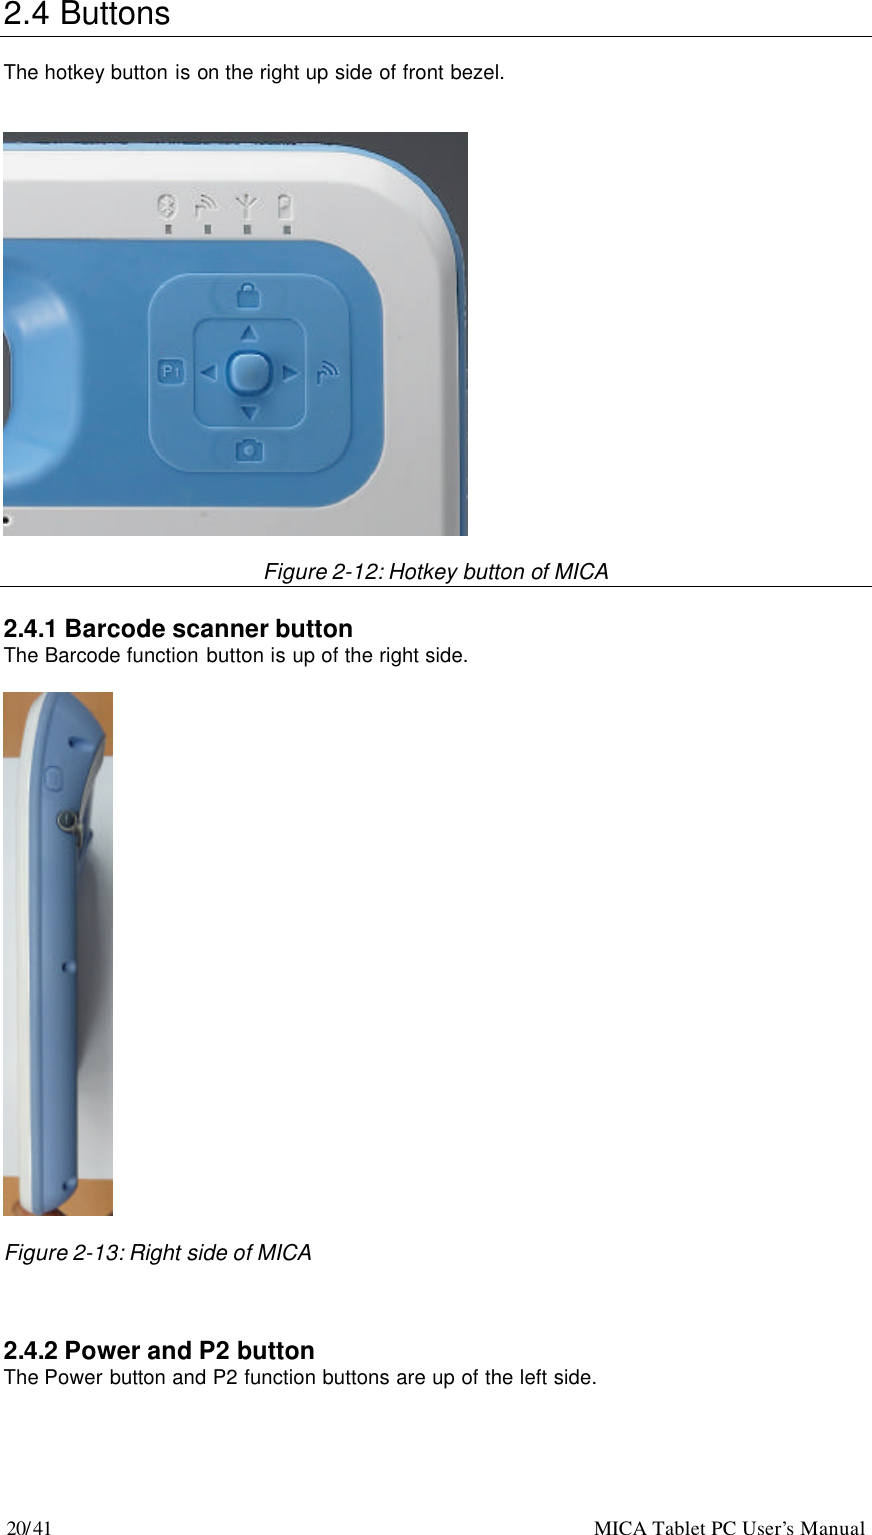 20/41                                                    MICA Tablet PC User’s Manual 2.4 Buttons    The hotkey button is on the right up side of front bezel.     Figure 2-12: Hotkey button of MICA  2.4.1 Barcode scanner button   The Barcode function button is up of the right side.    Figure 2-13: Right side of MICA    2.4.2 Power and P2 button   The Power button and P2 function buttons are up of the left side.  